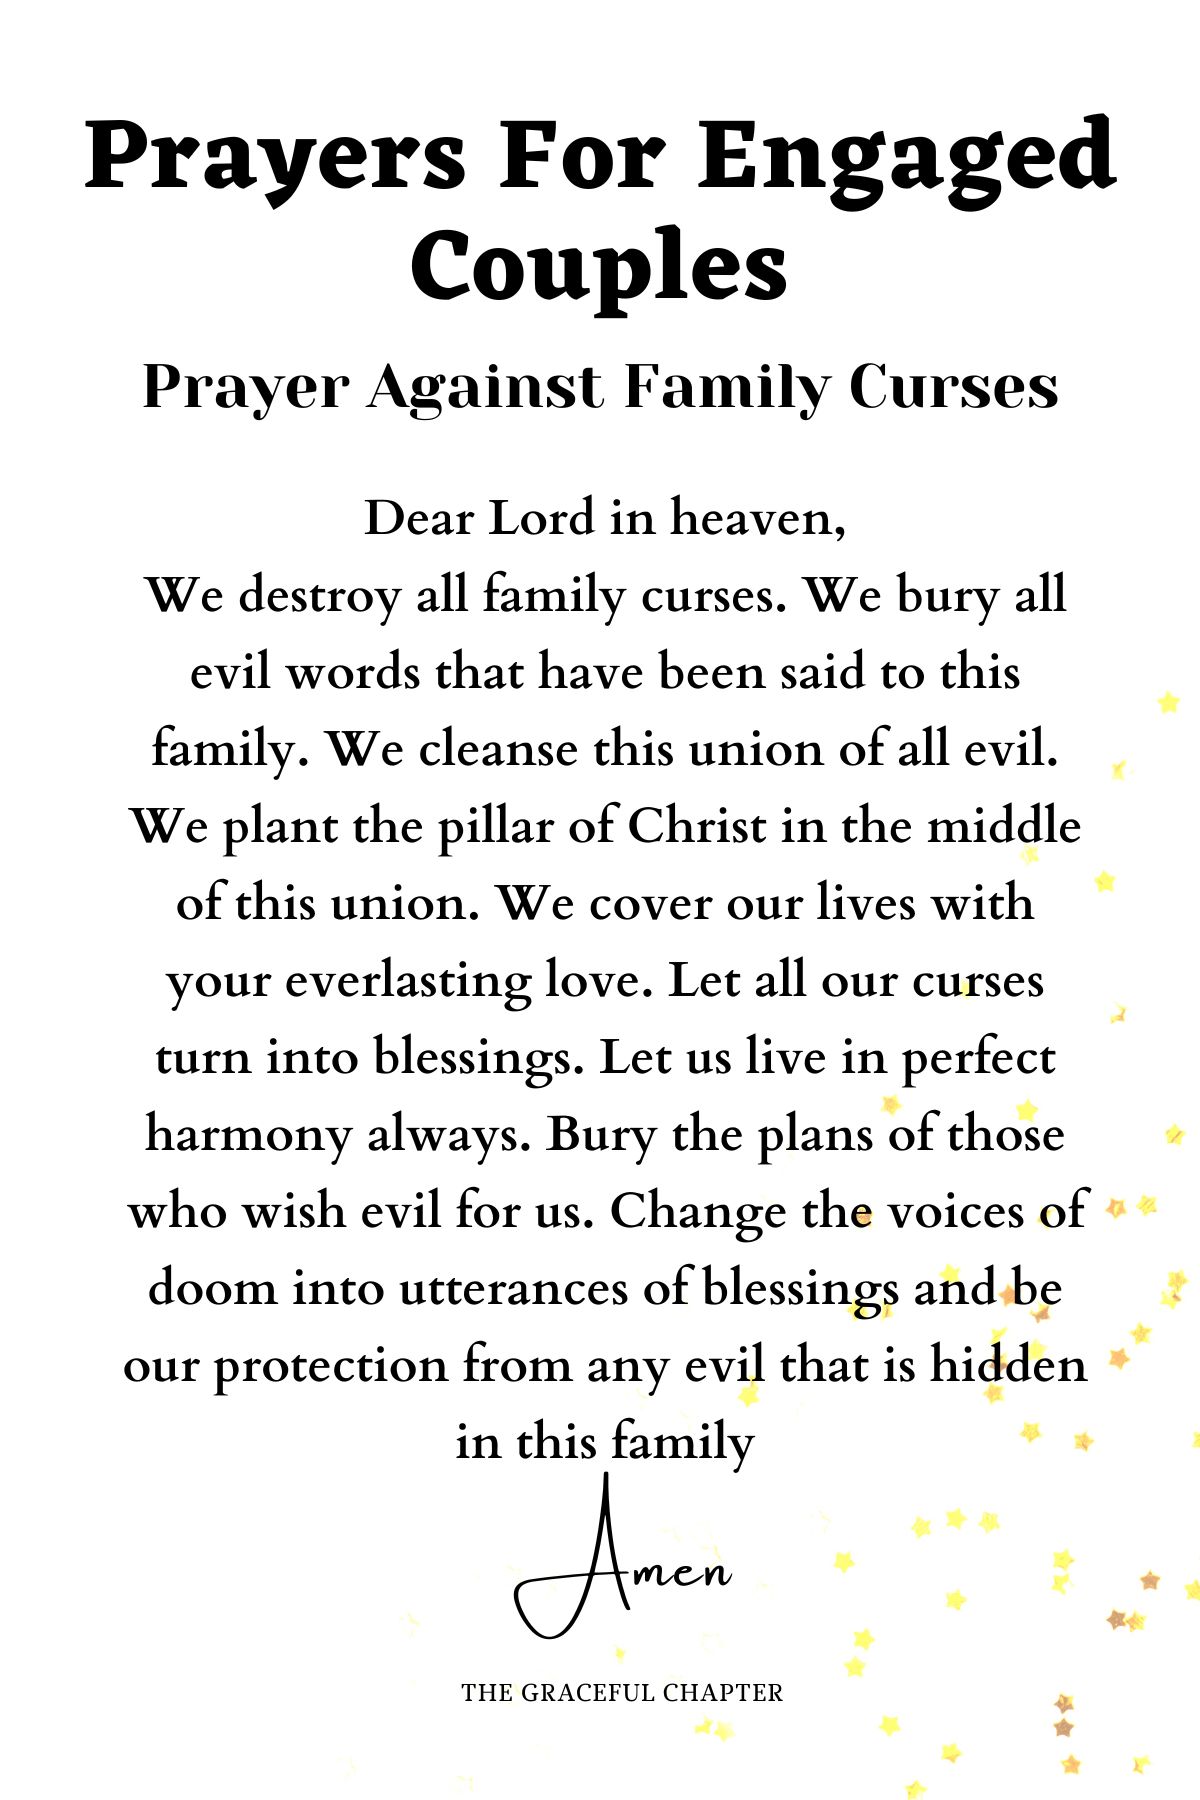  Prayer against family curses  prayer for engaged couples 
